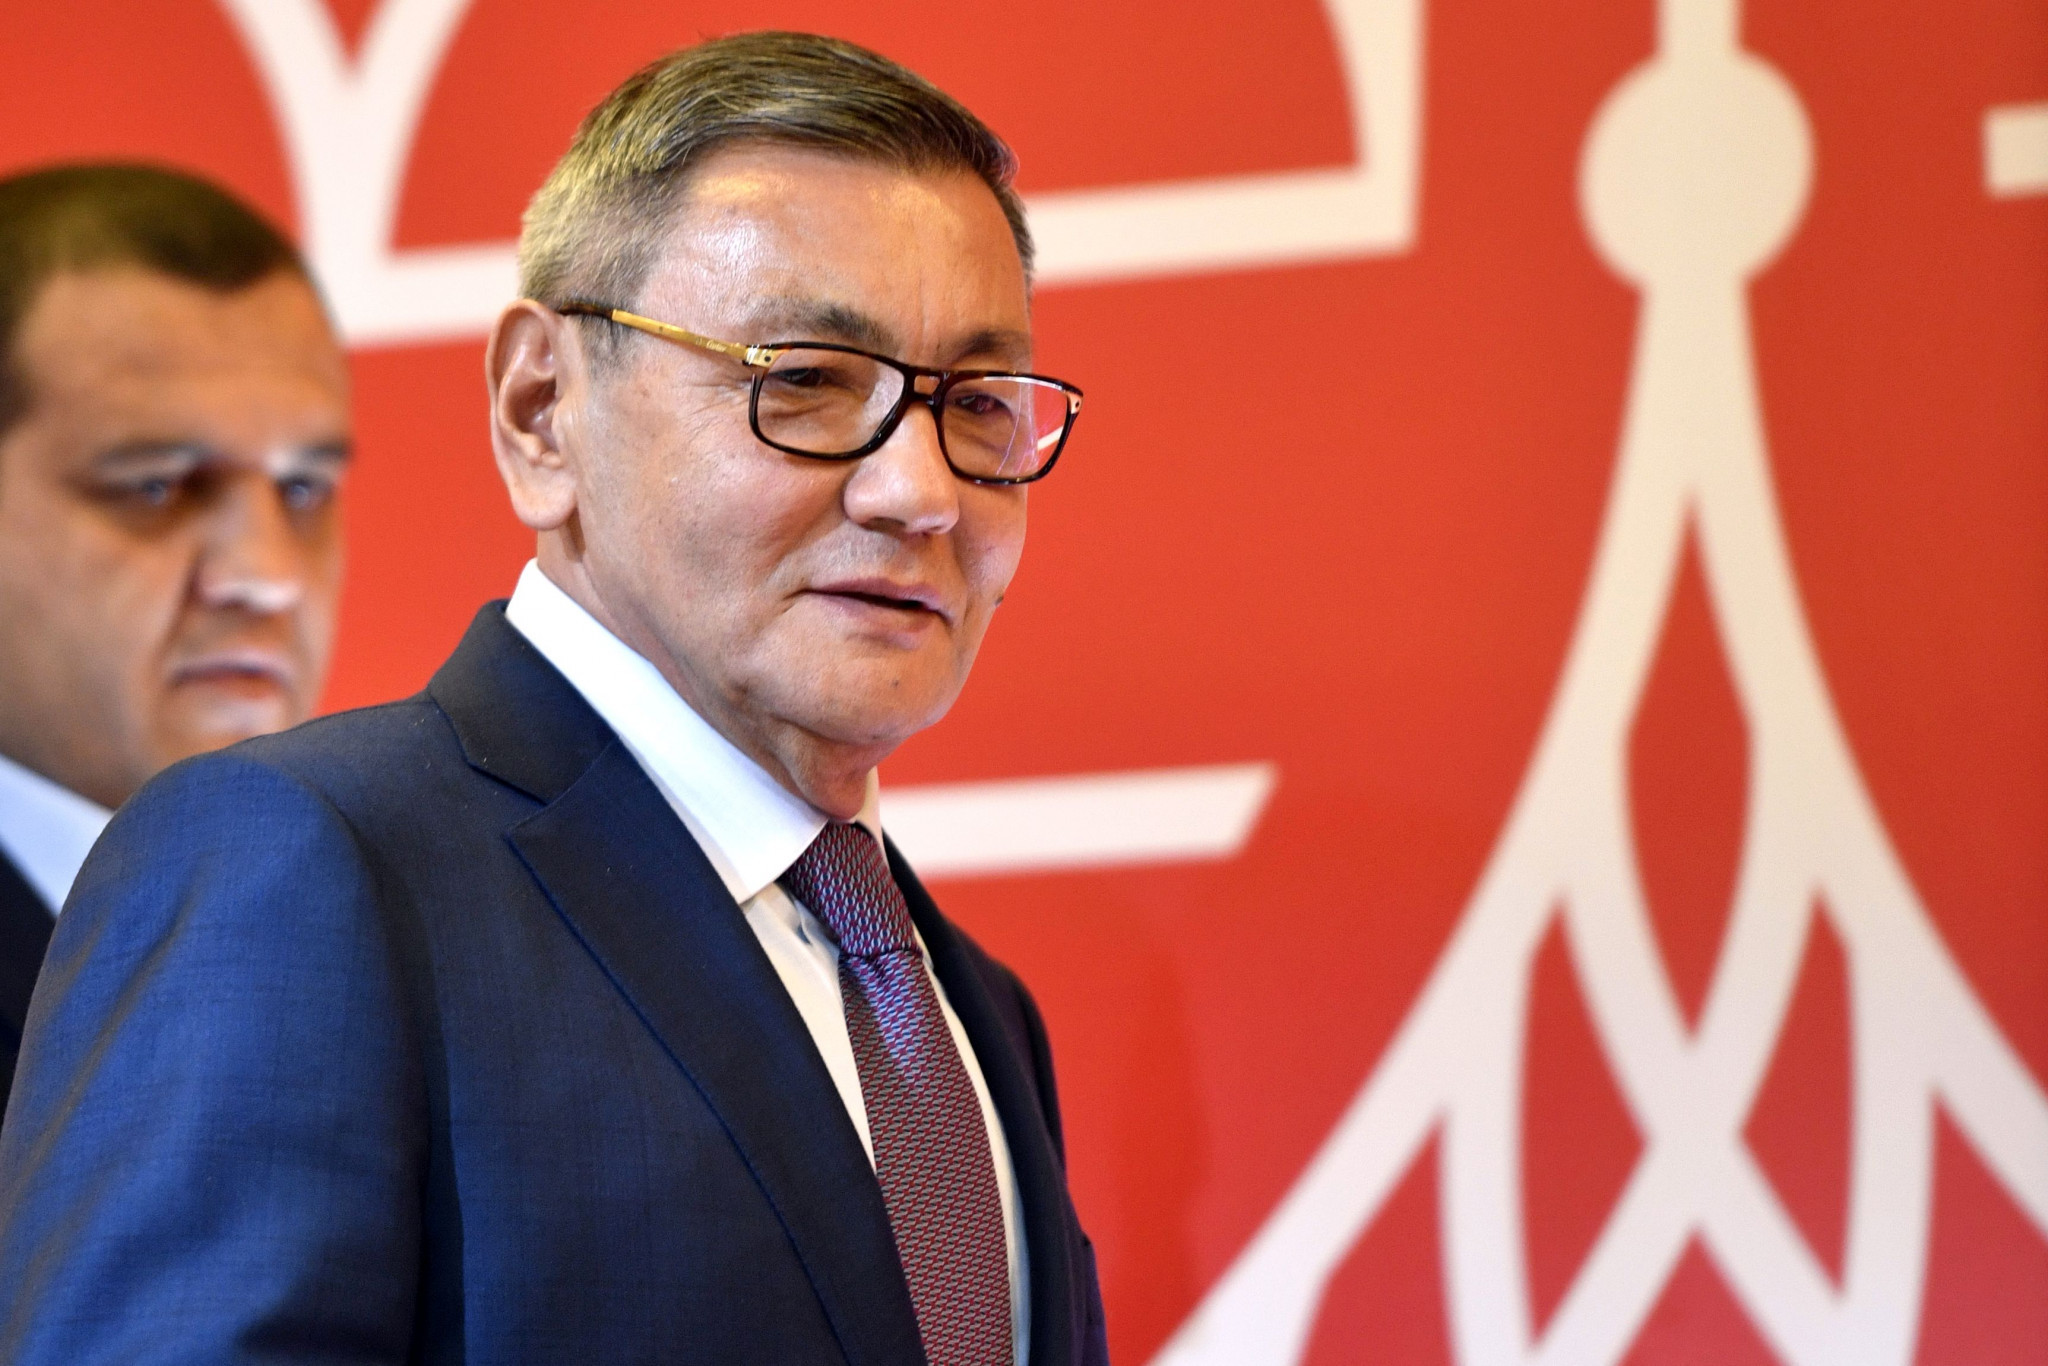 Rakhimov claims AIBA has left "troubled past behind us" in letter to National Member Federations